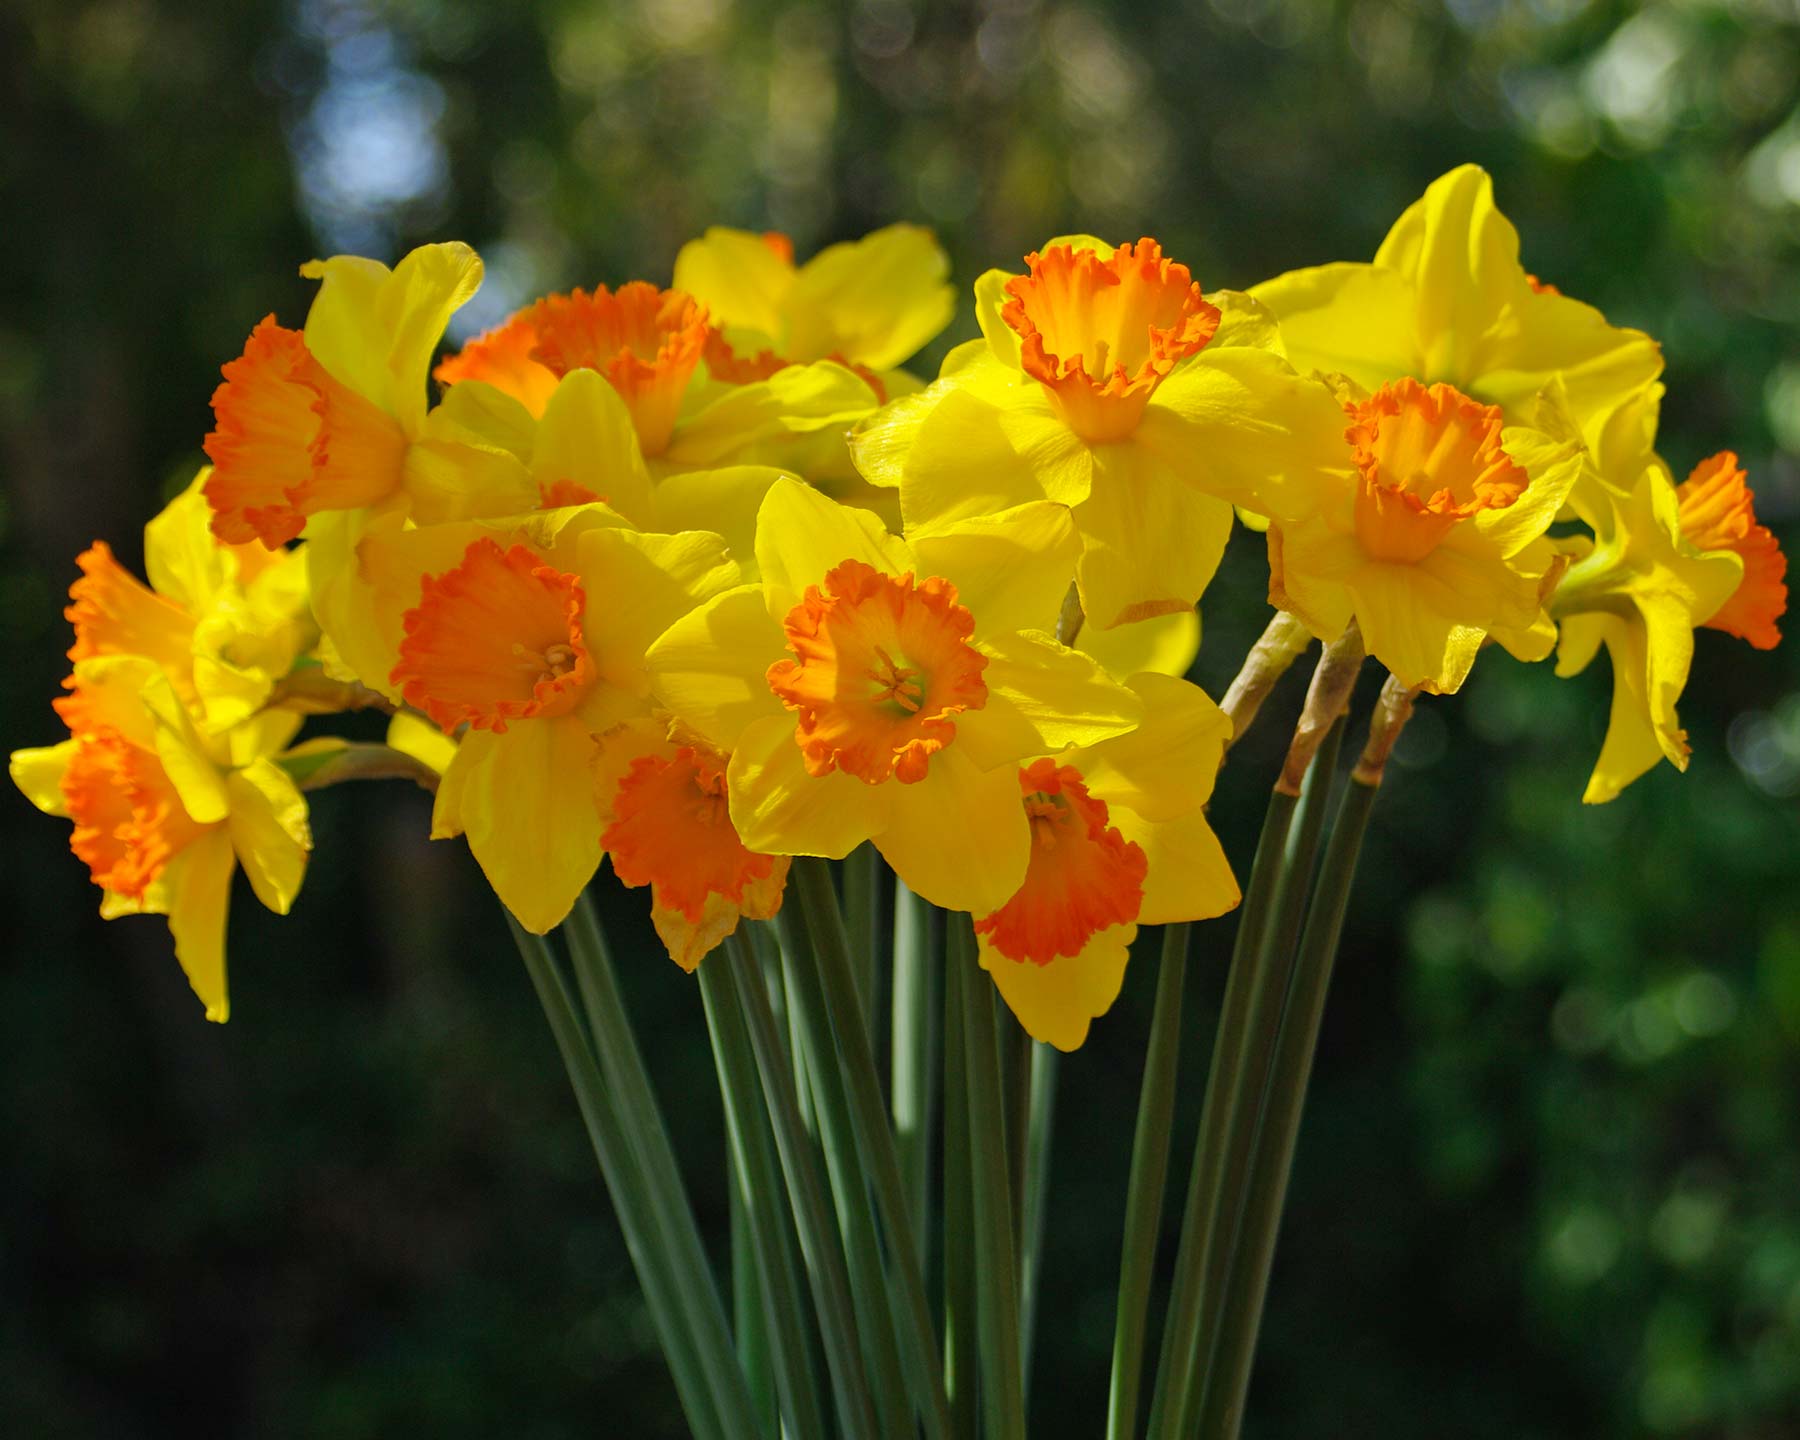 Narcissus - the ultimate harbinger of spring